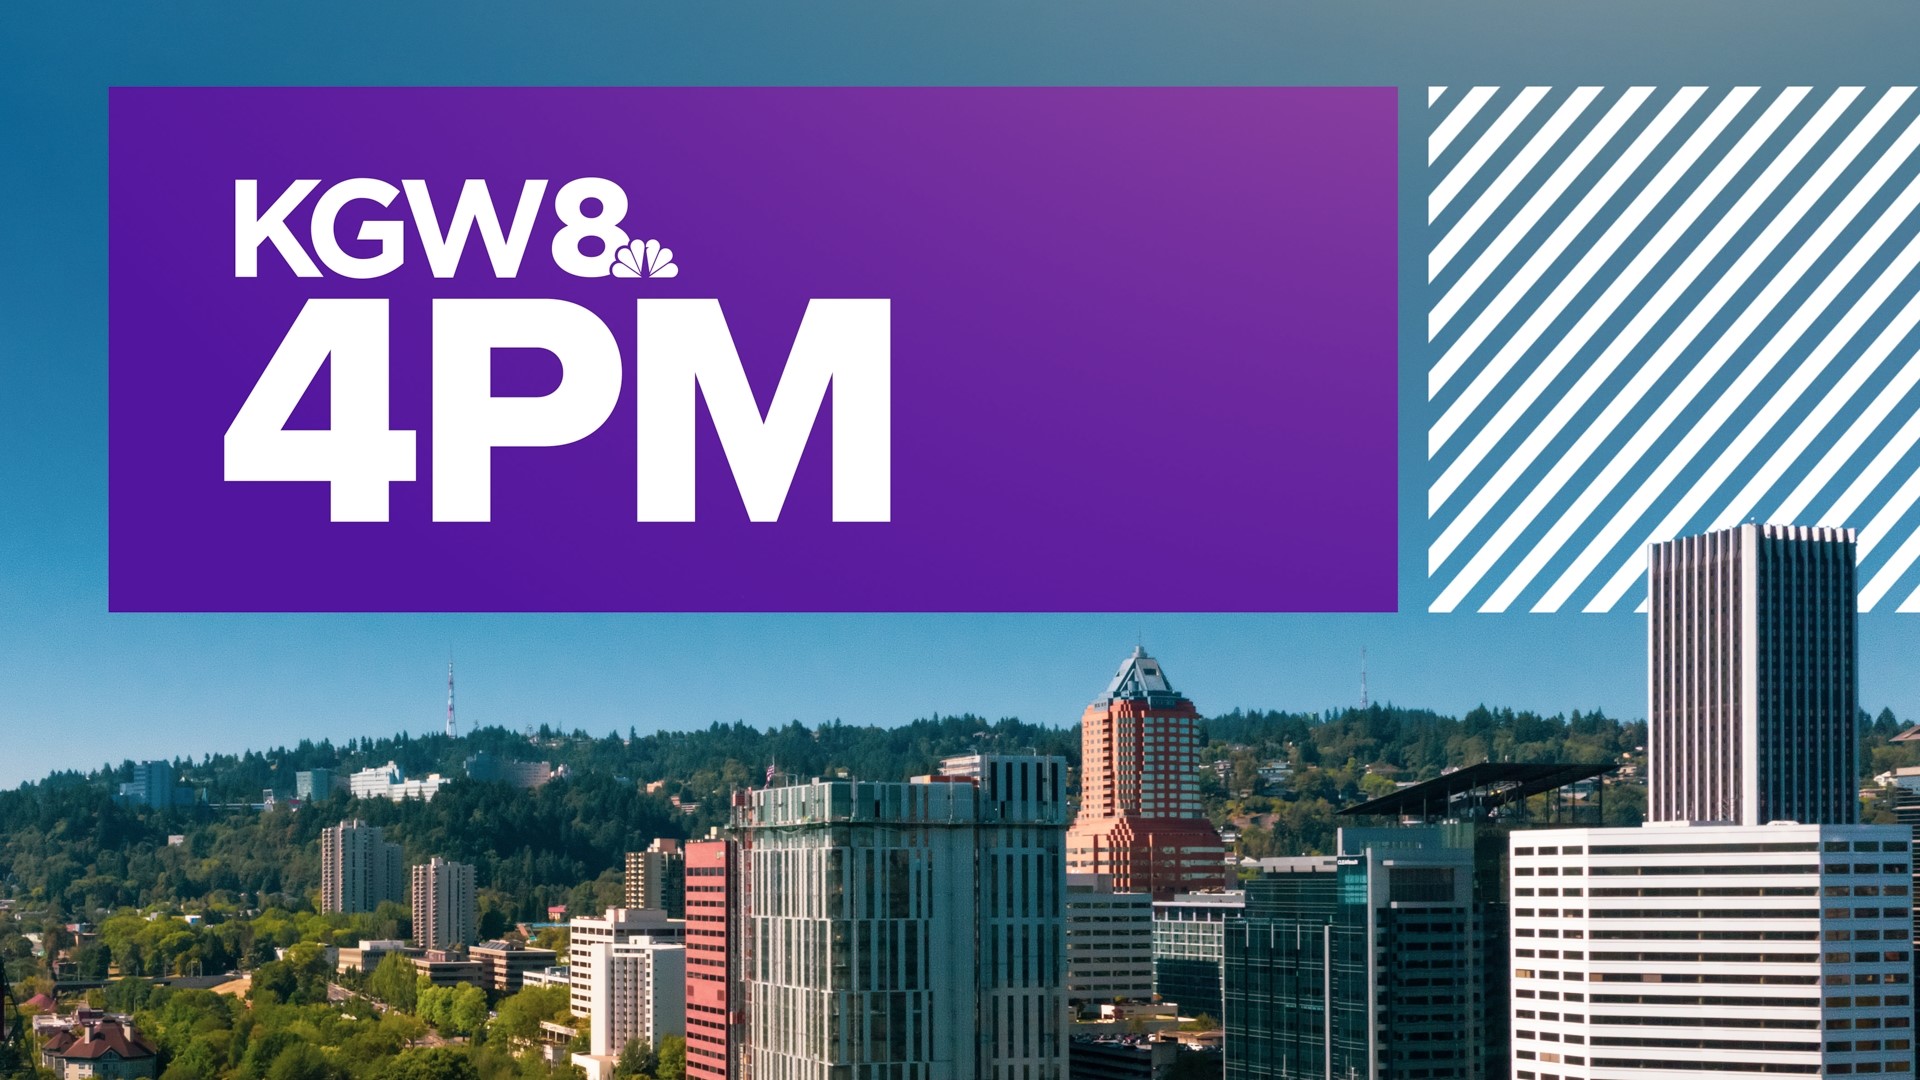 Uplifting community stories, news, and weather from KGW